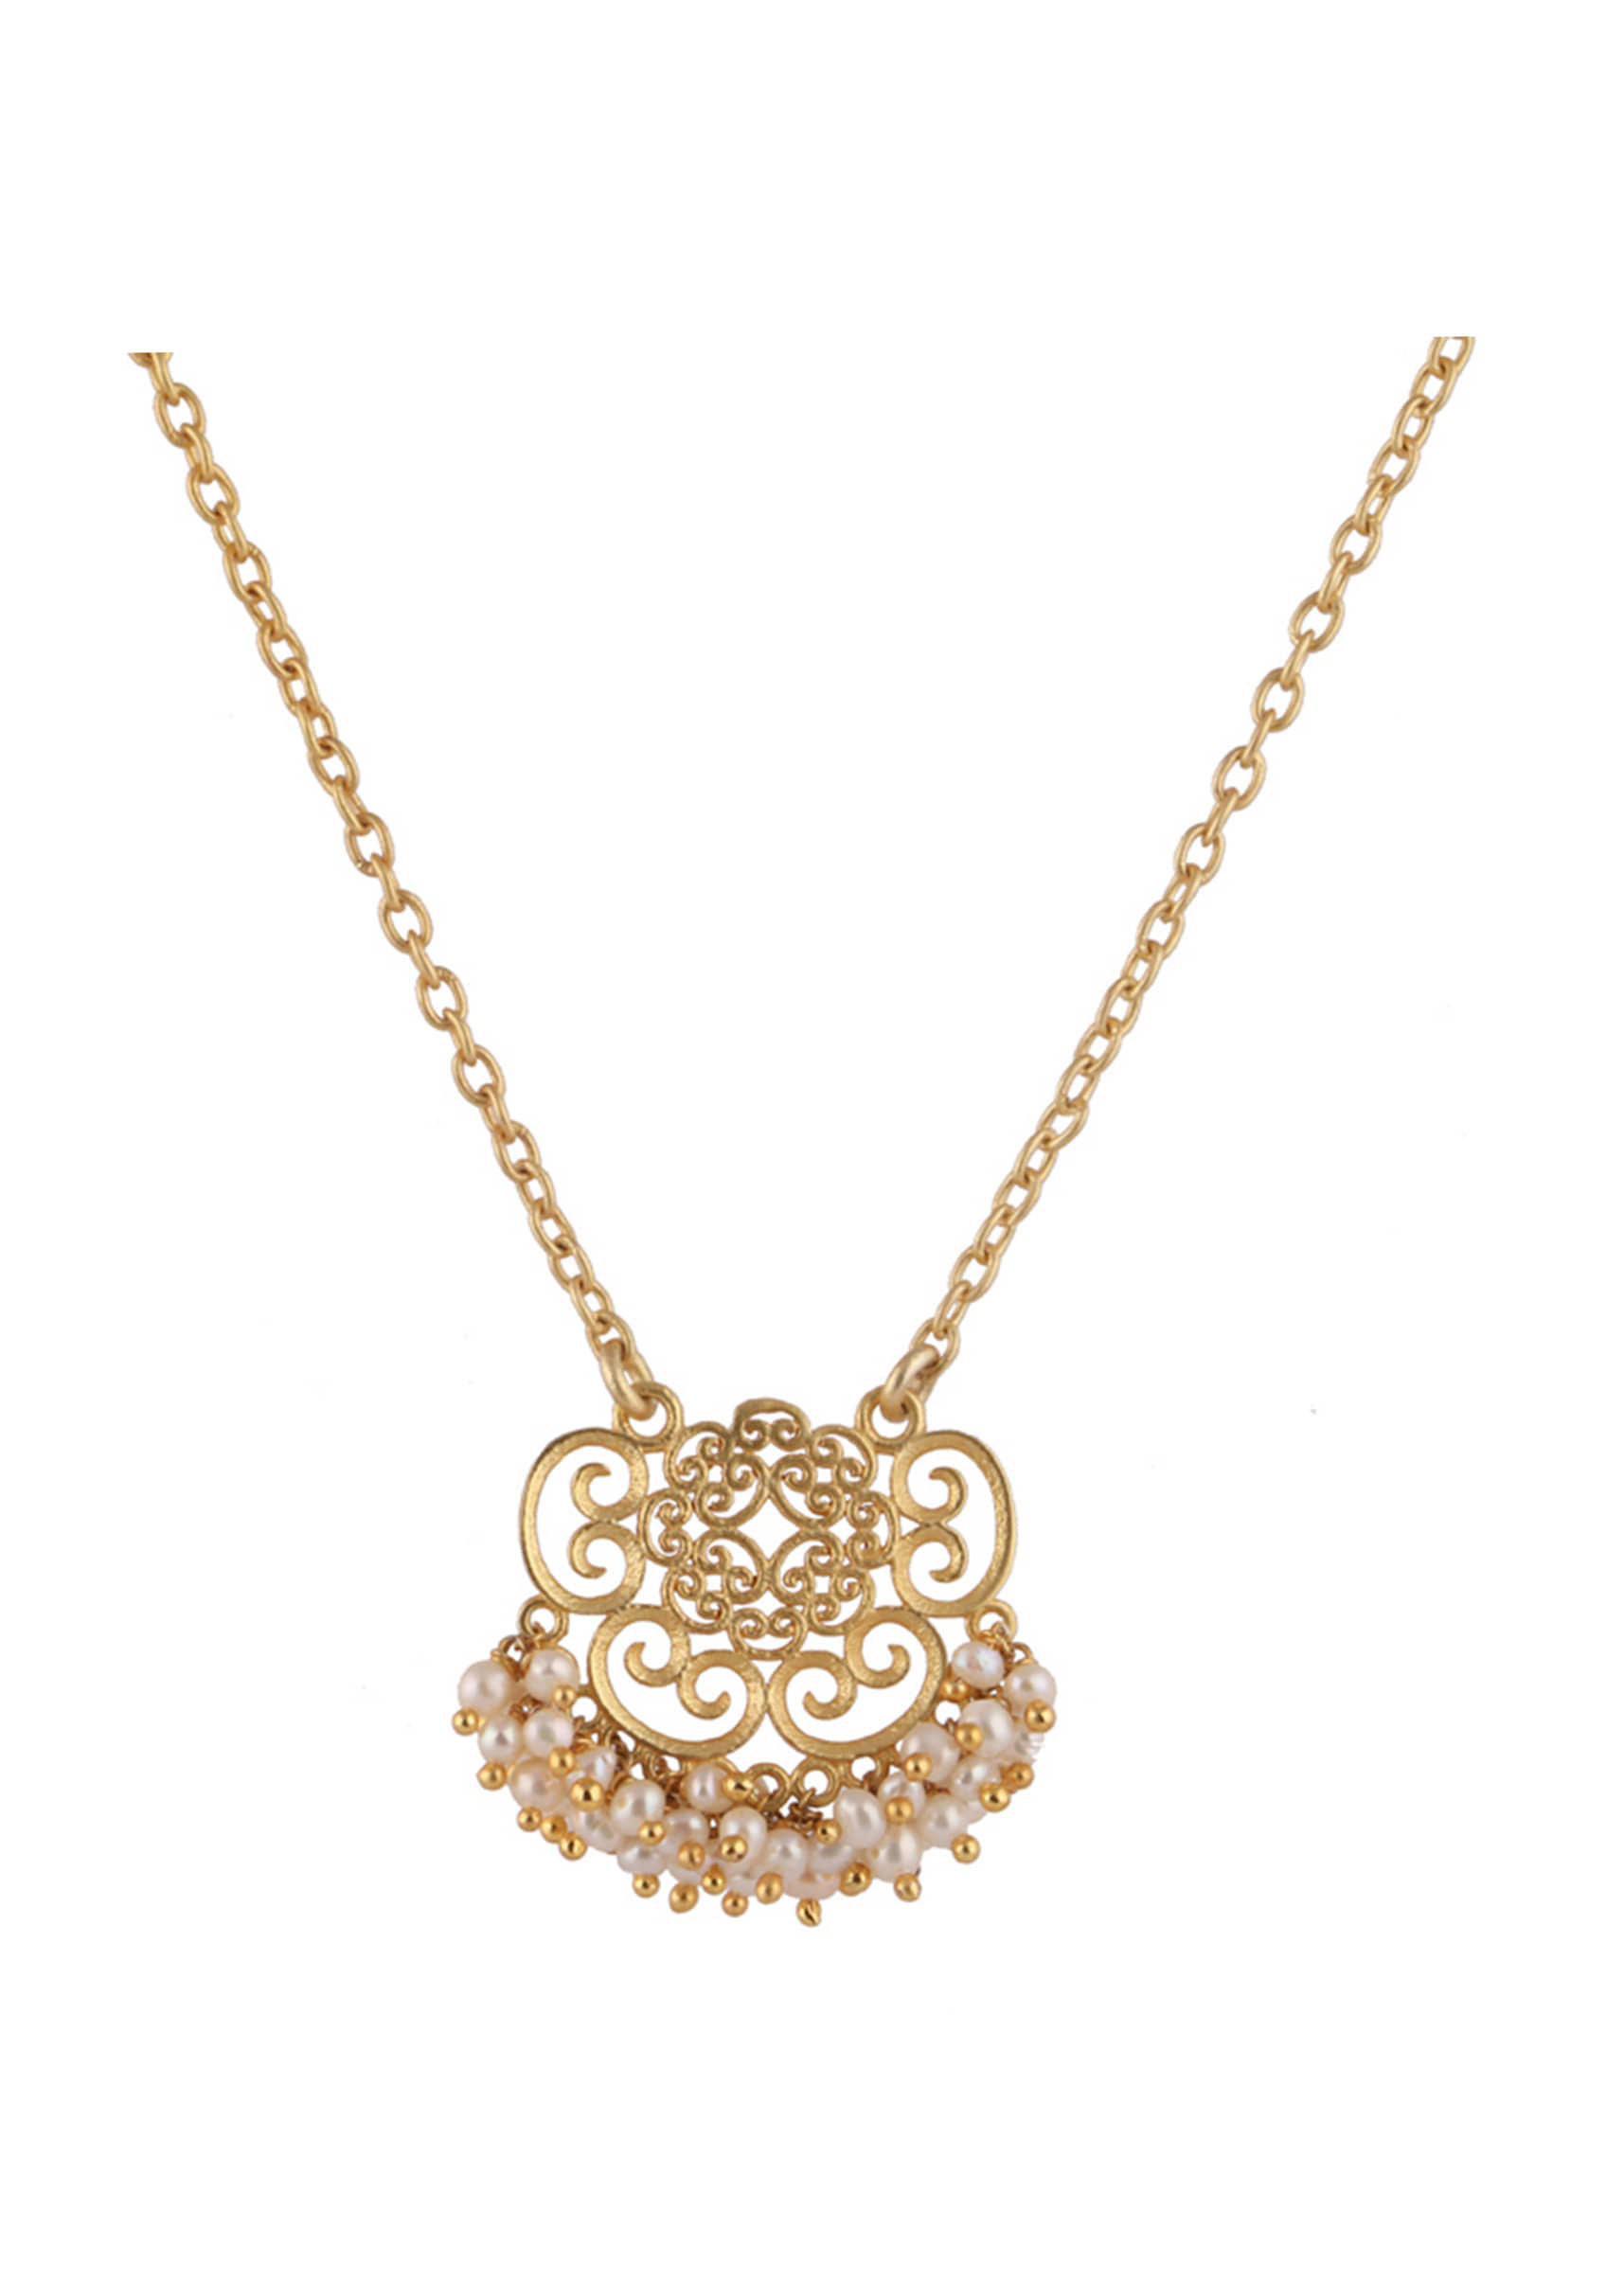 Gold Plated Necklace With Delicate Filigree Design And Pearls By Zariin